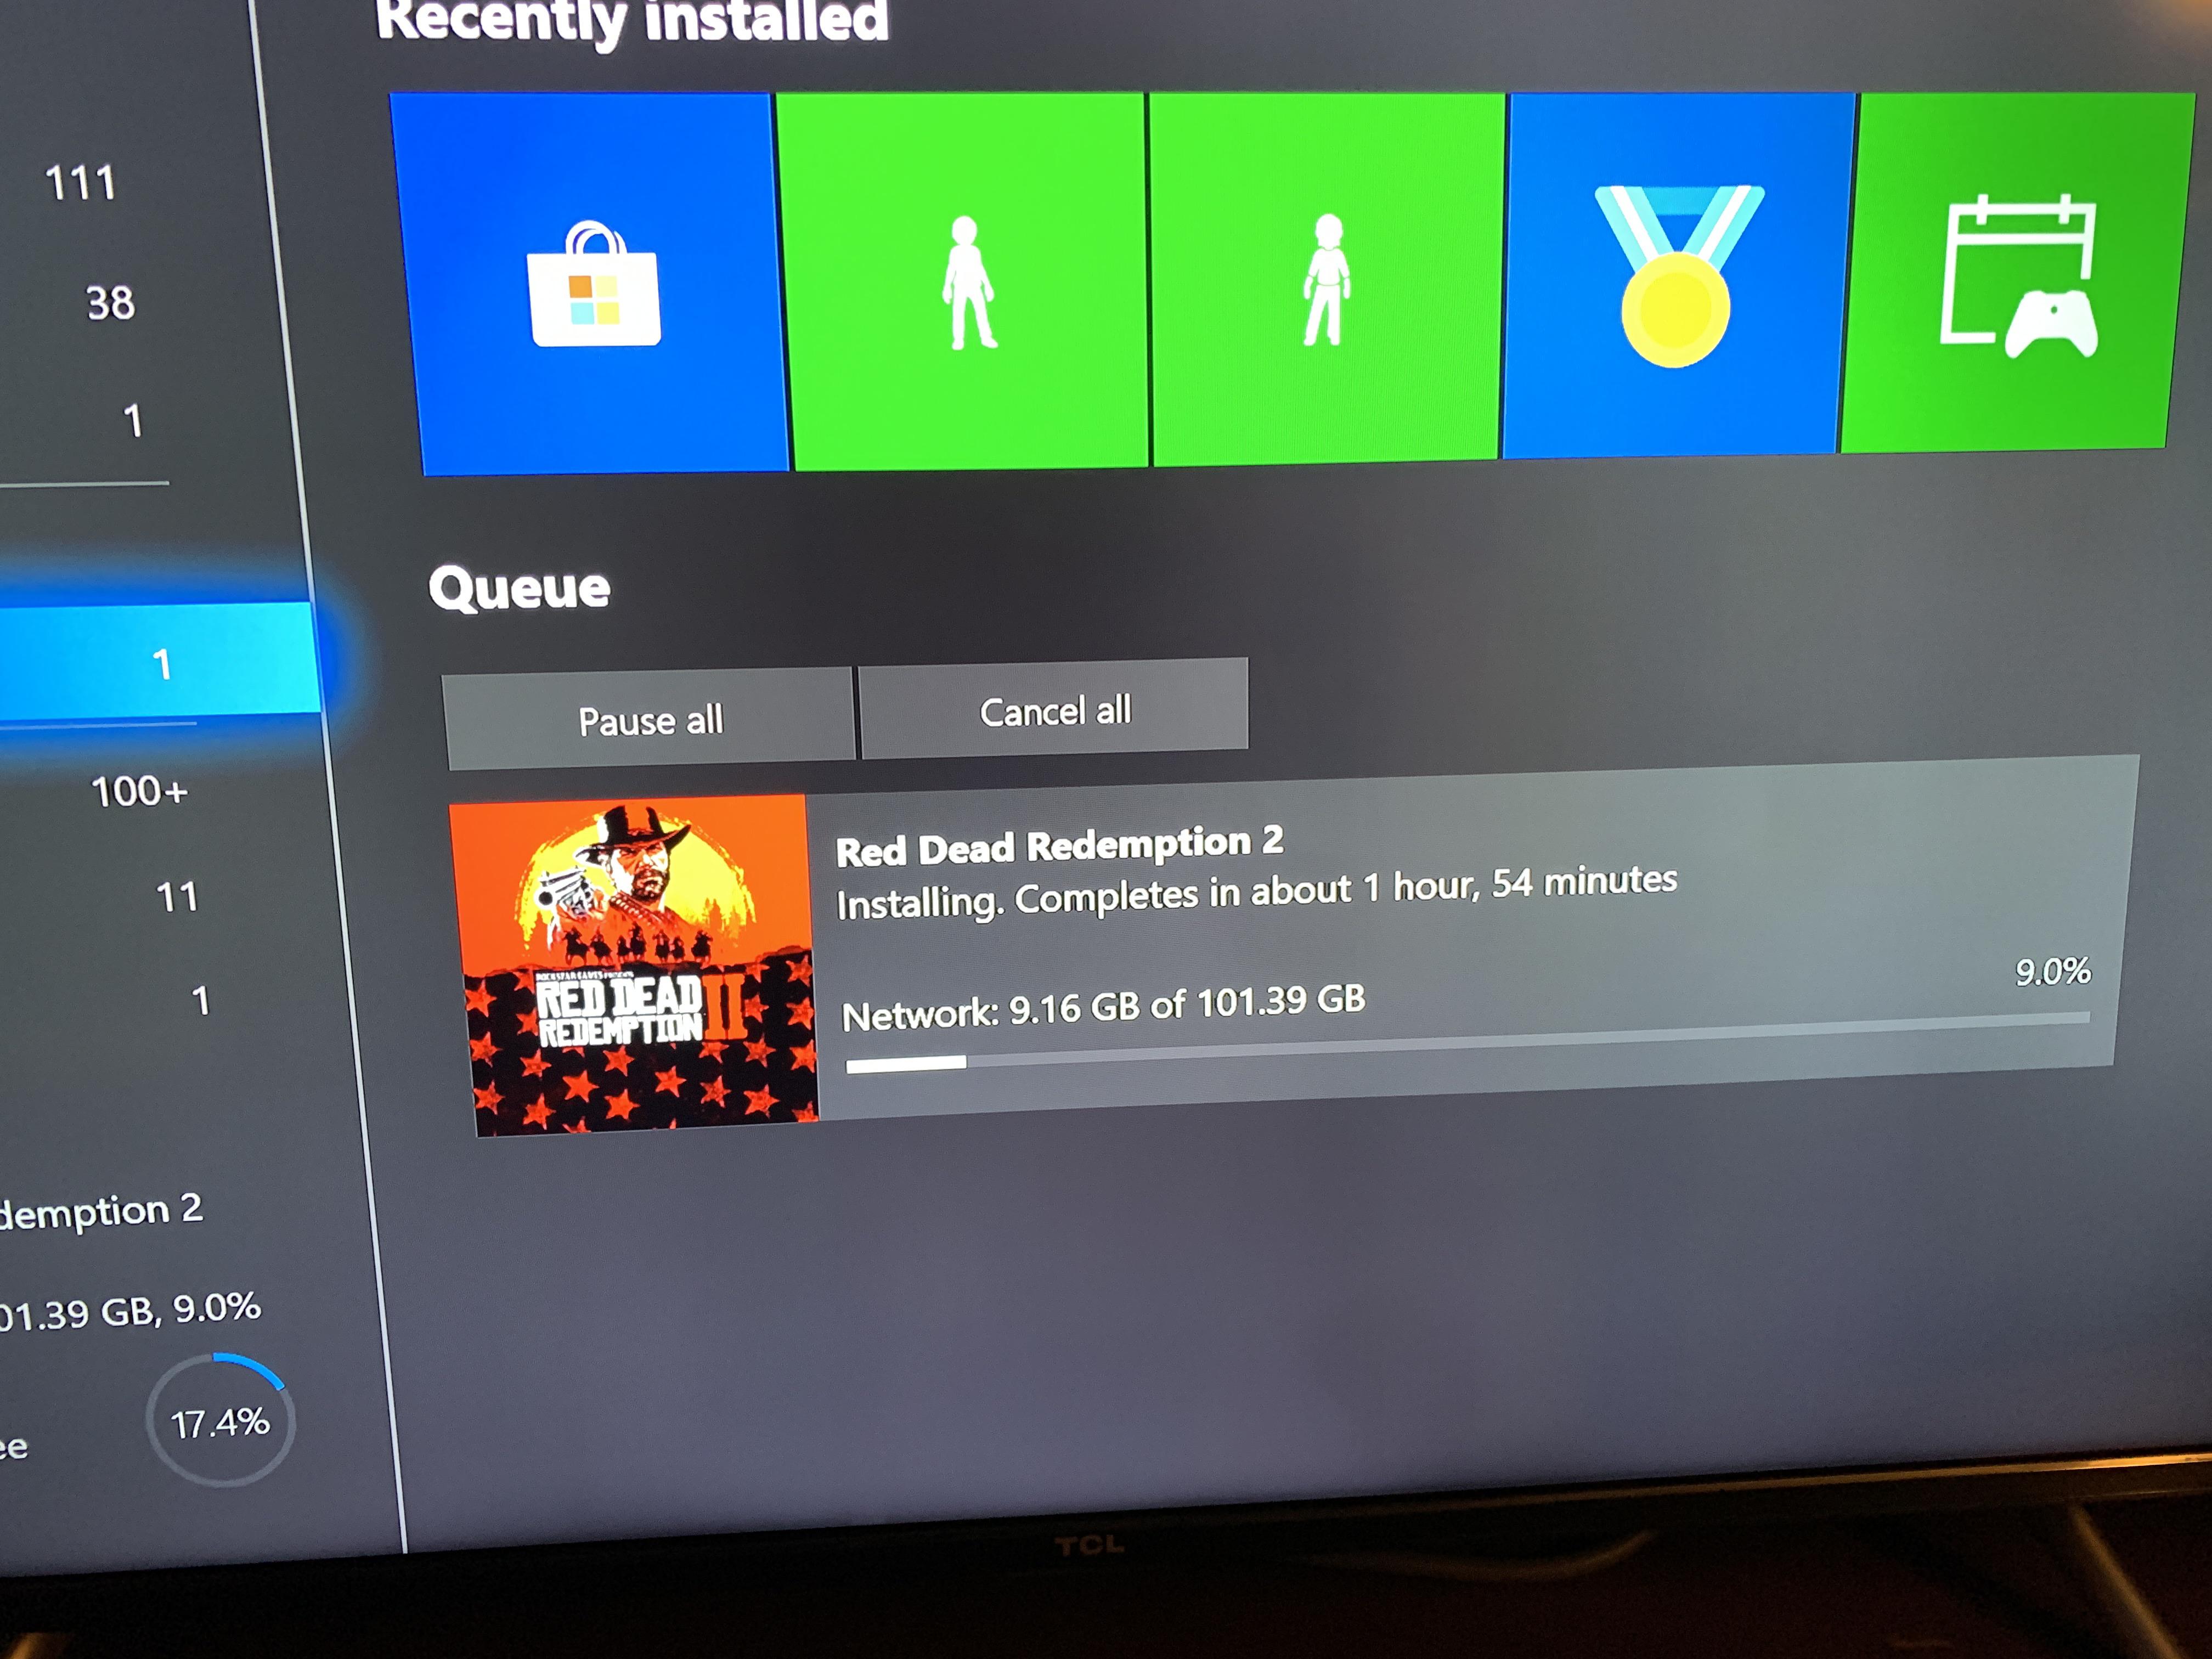 How to Download Games on Xbox One?